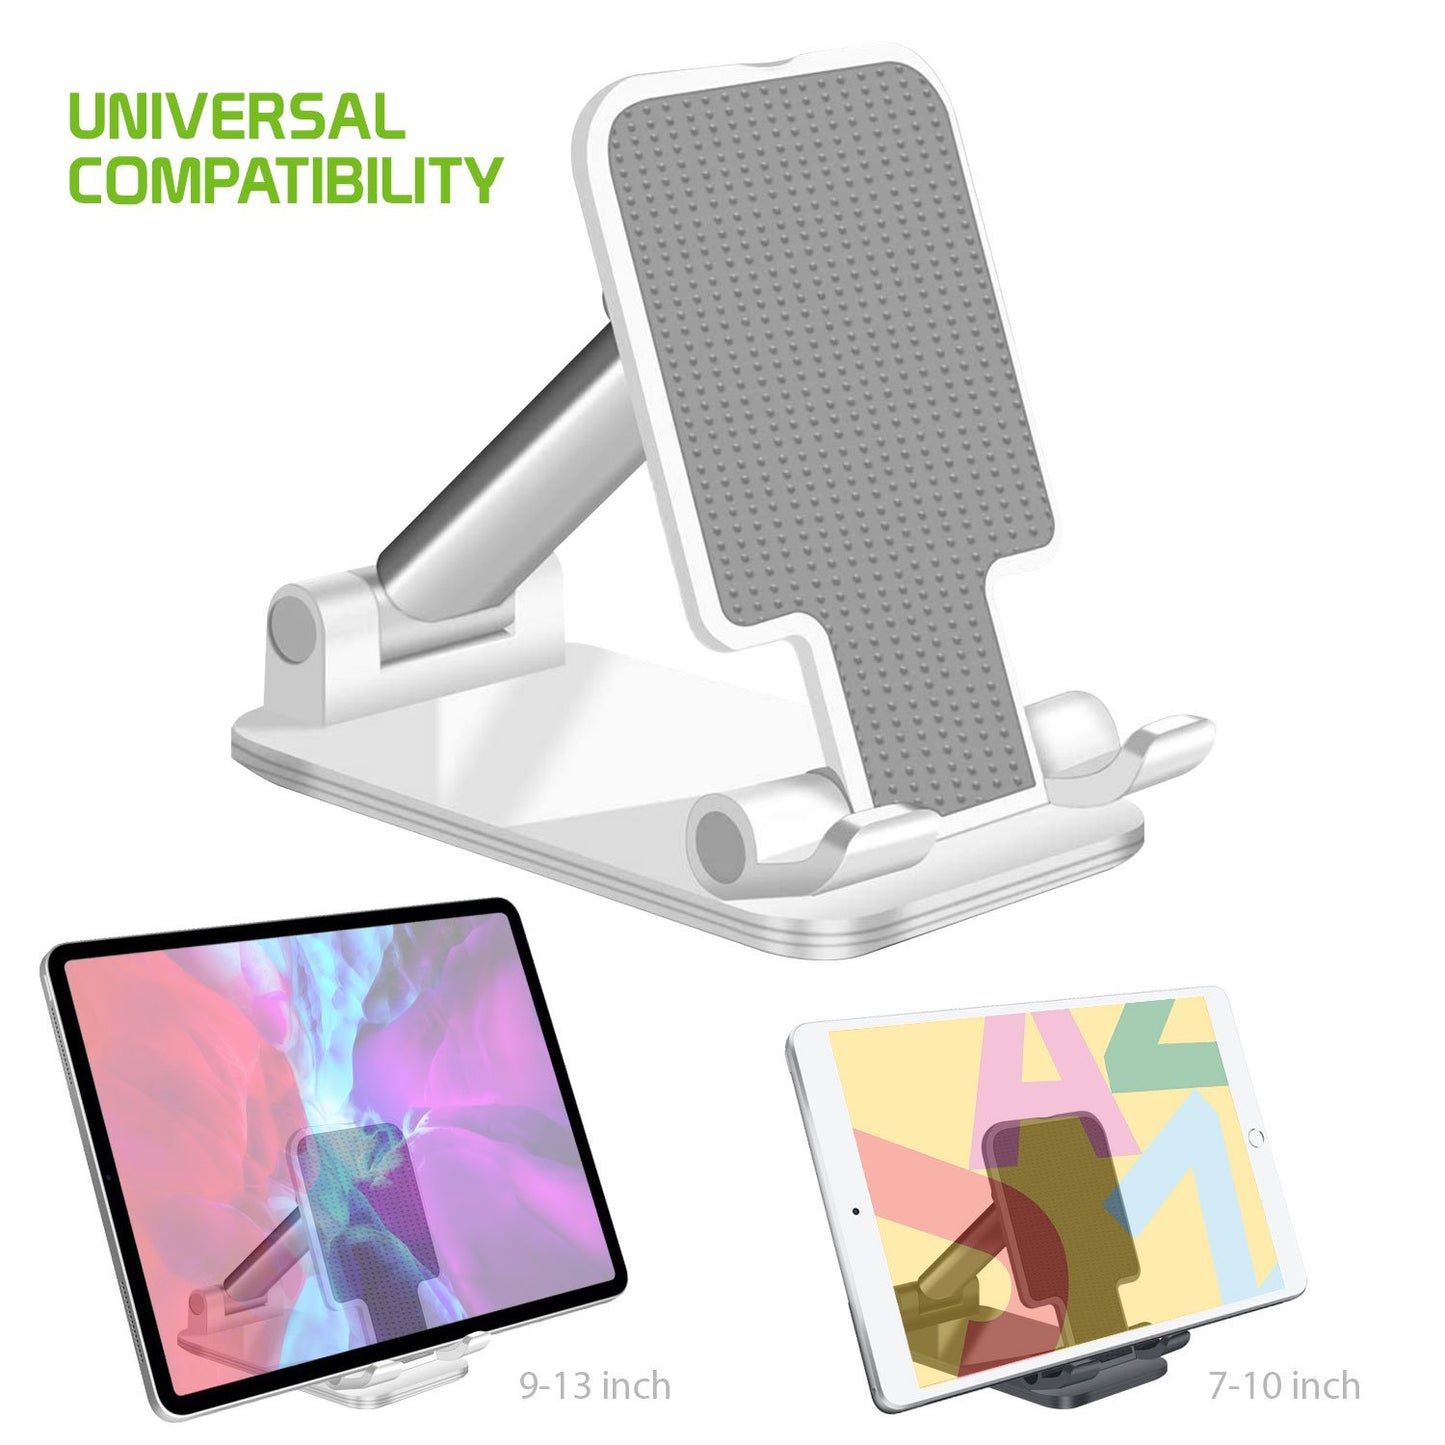 PH60BK -   Adjustable Desktop Smartphone and Tablet Stand with Non-Slip Rubberized Grips and Weighted Base Compatible to Smartphones, Tablets, iPads